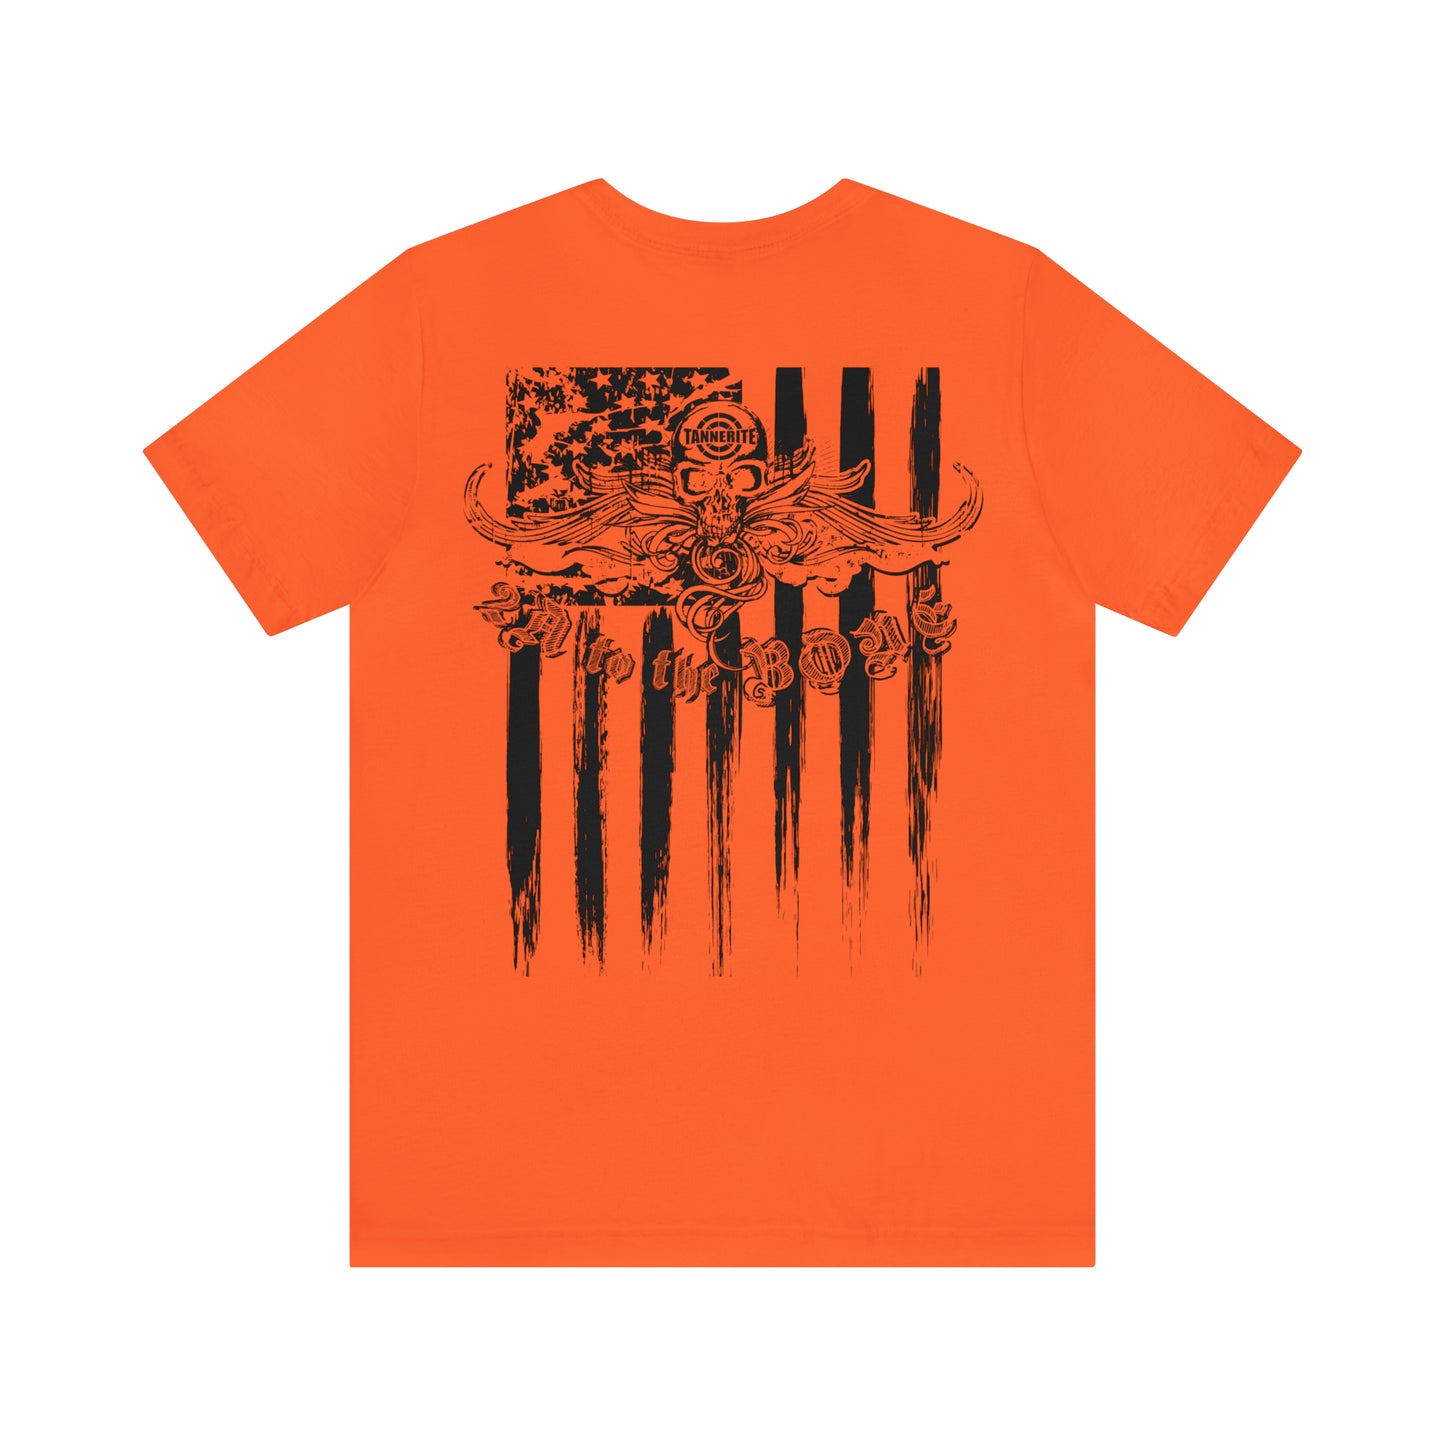 2A to the Bone Tannerite® Sports - Jersey High Quality Tshirt